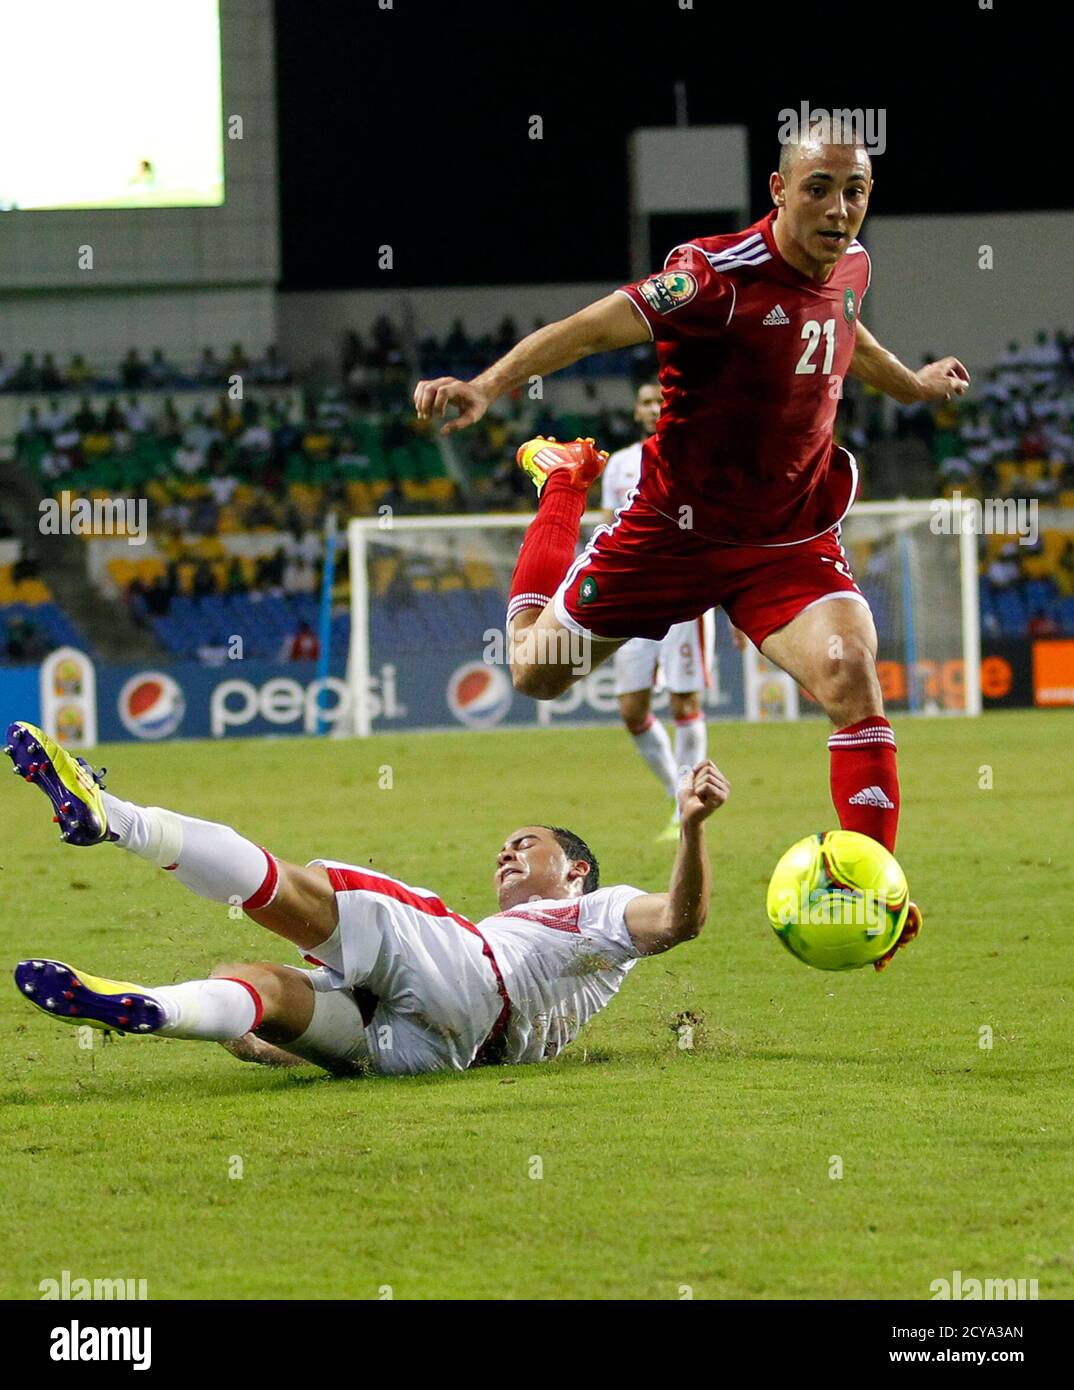 Morocco's Amrabat Noureddine (21) drives the ball over Tunisia's Jemal Ammar during their African Cup of Nations Group C soccer match at Stade De L'Amitie Stadium in Libreville January 23, 2012. REUTERS/Thomas Mukoya (GABON - Tags: SPORT SOCCER) Stock Photo